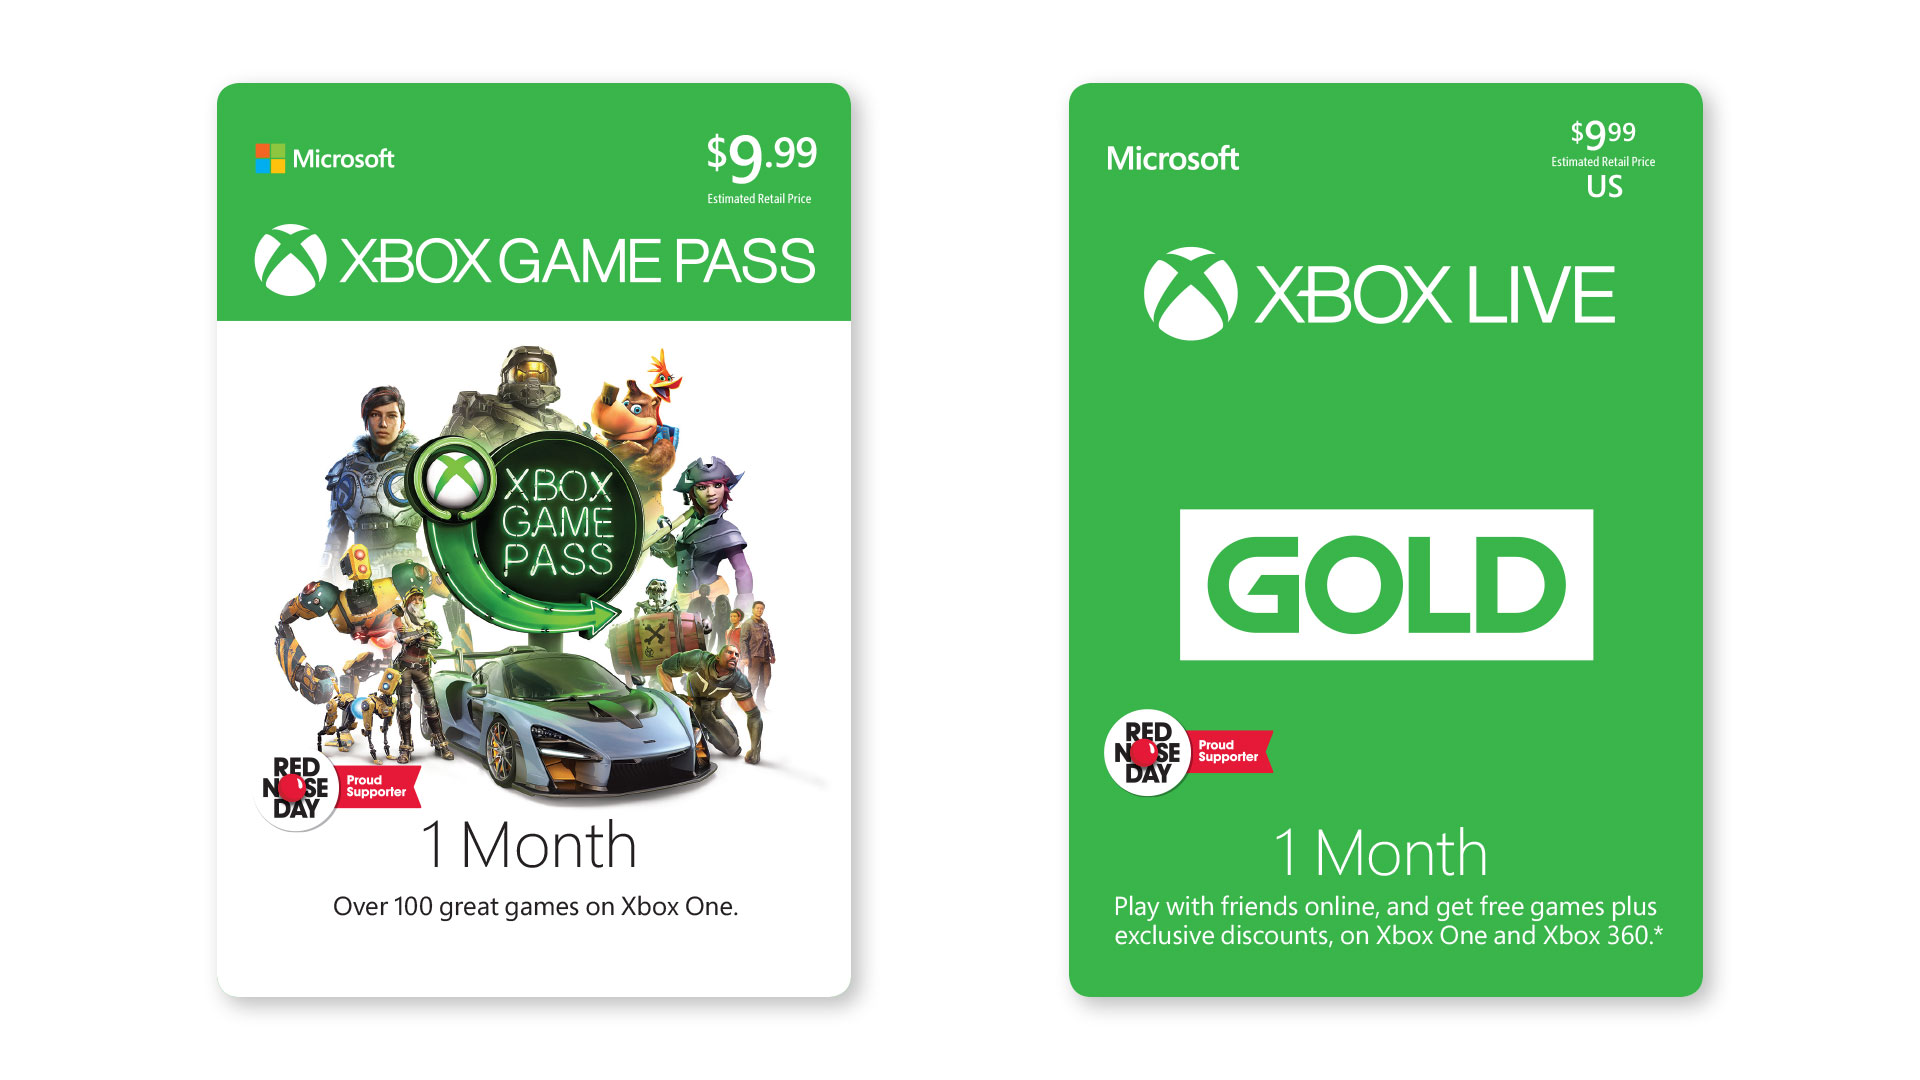 xbox game pass cards